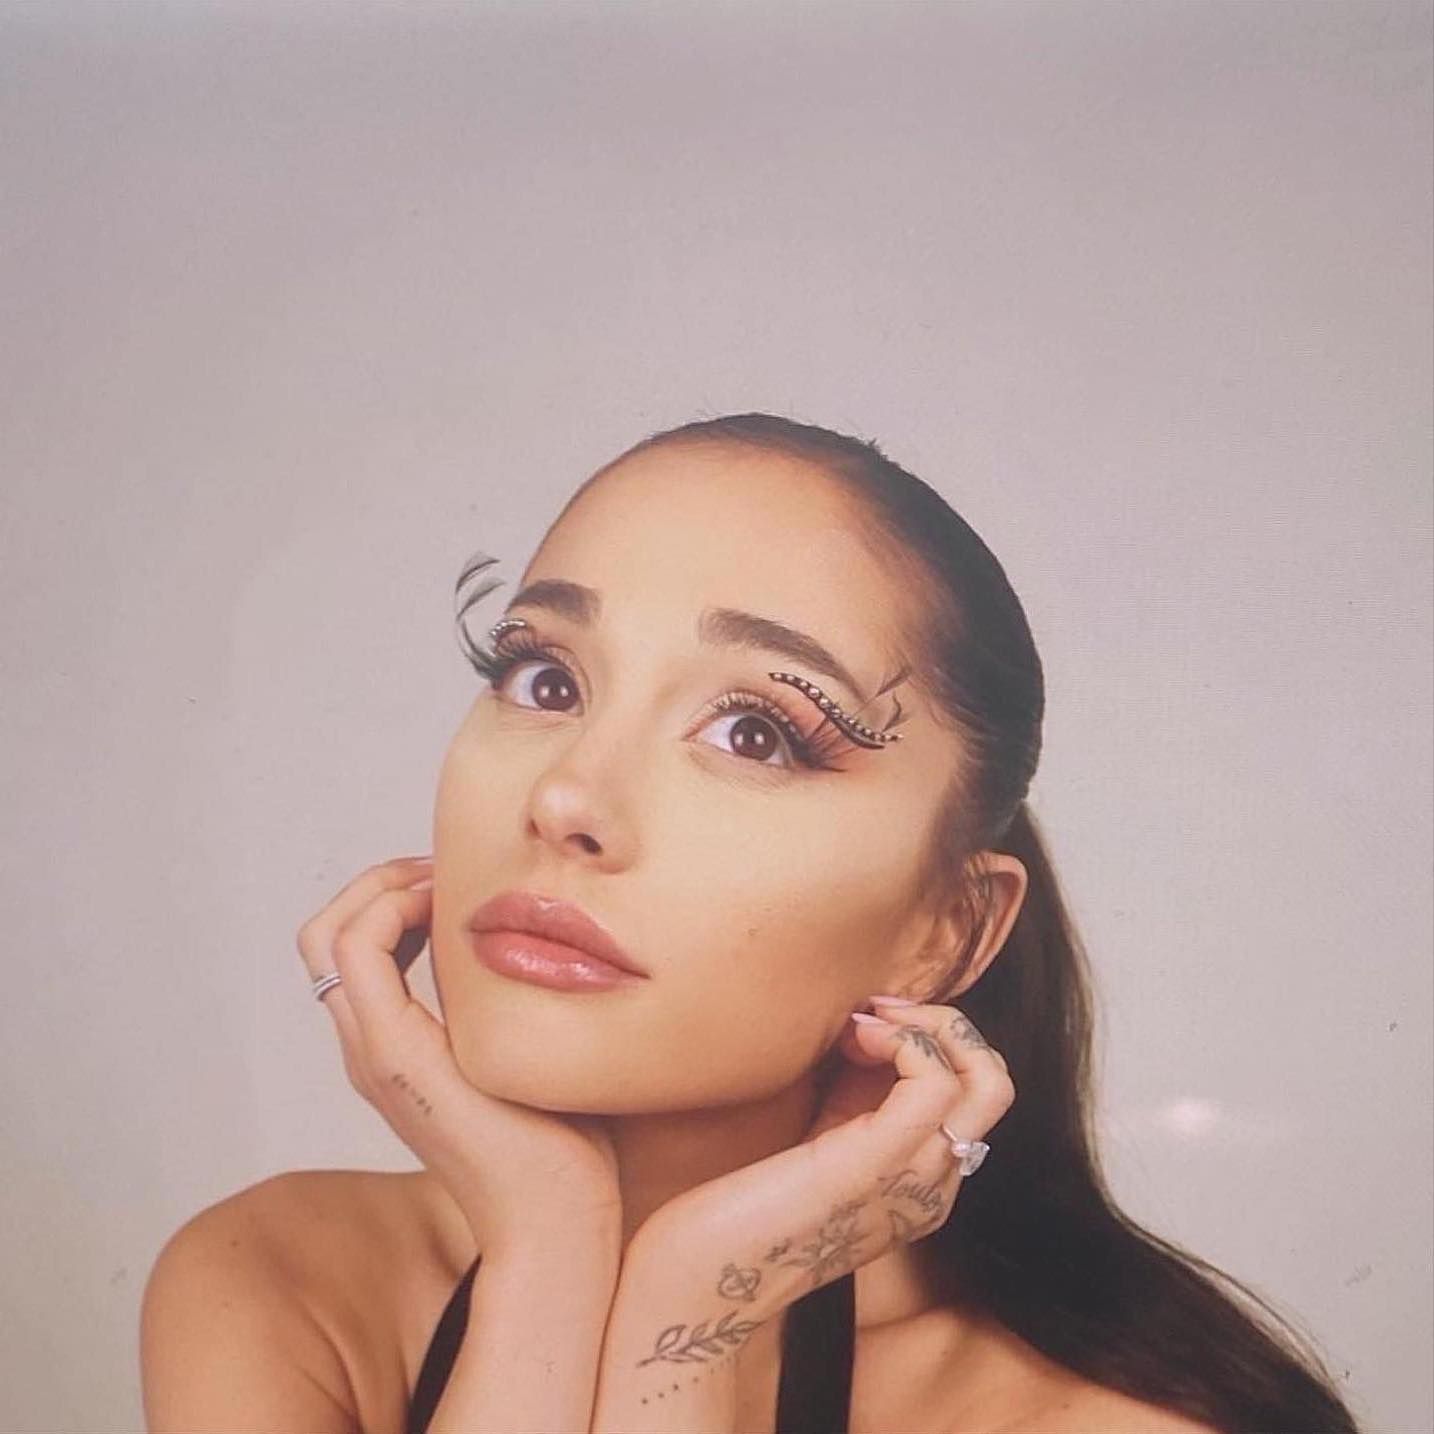 Ariana Grande Unveils '70s-Inspired Curtain Bangs On Instagram